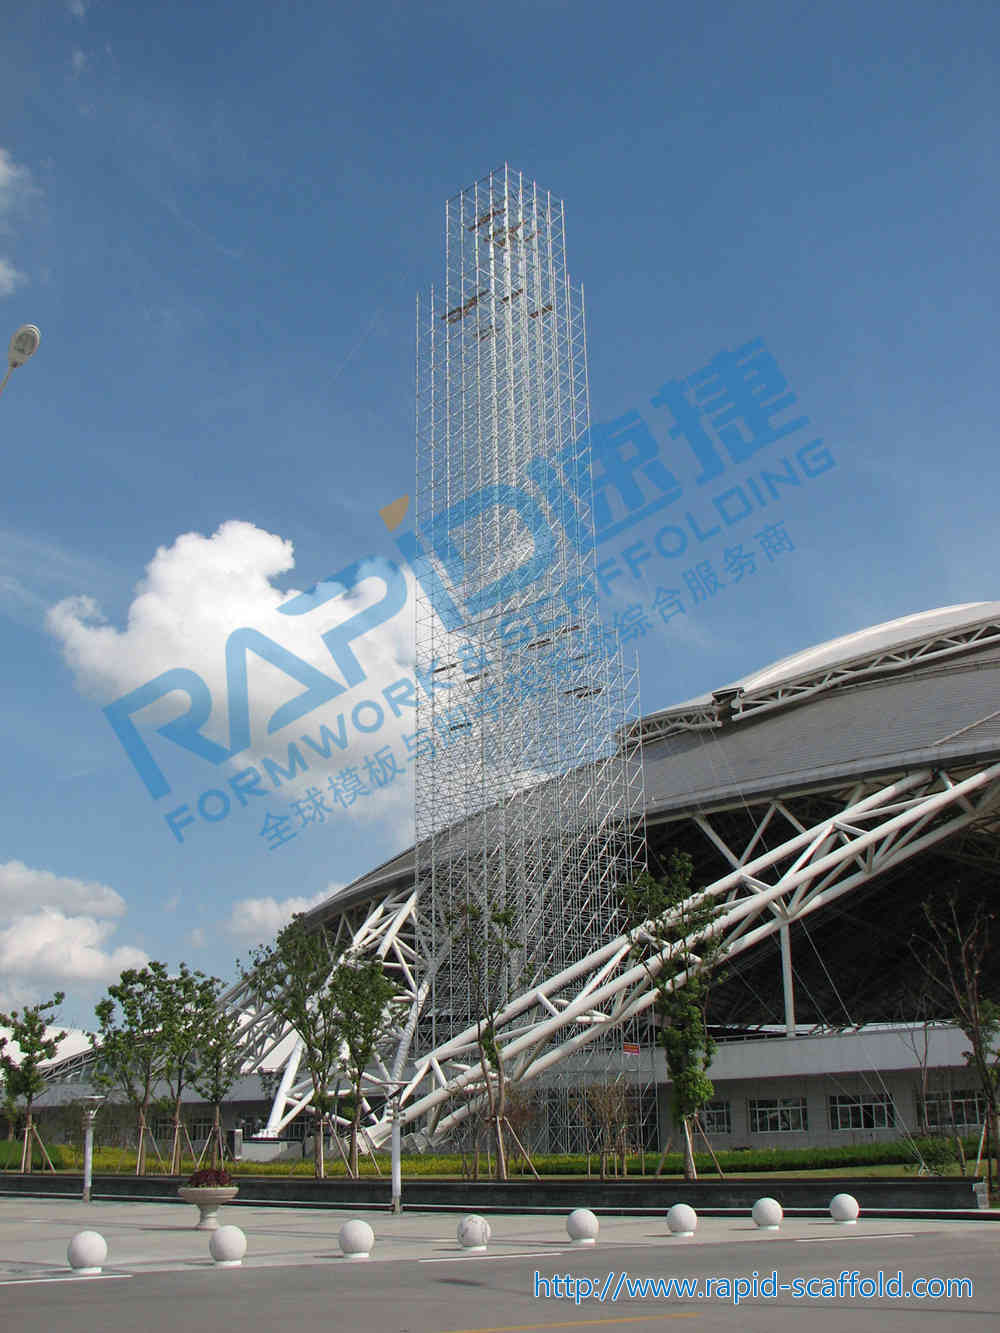 Nantong Sport Convention and Exhibition Center